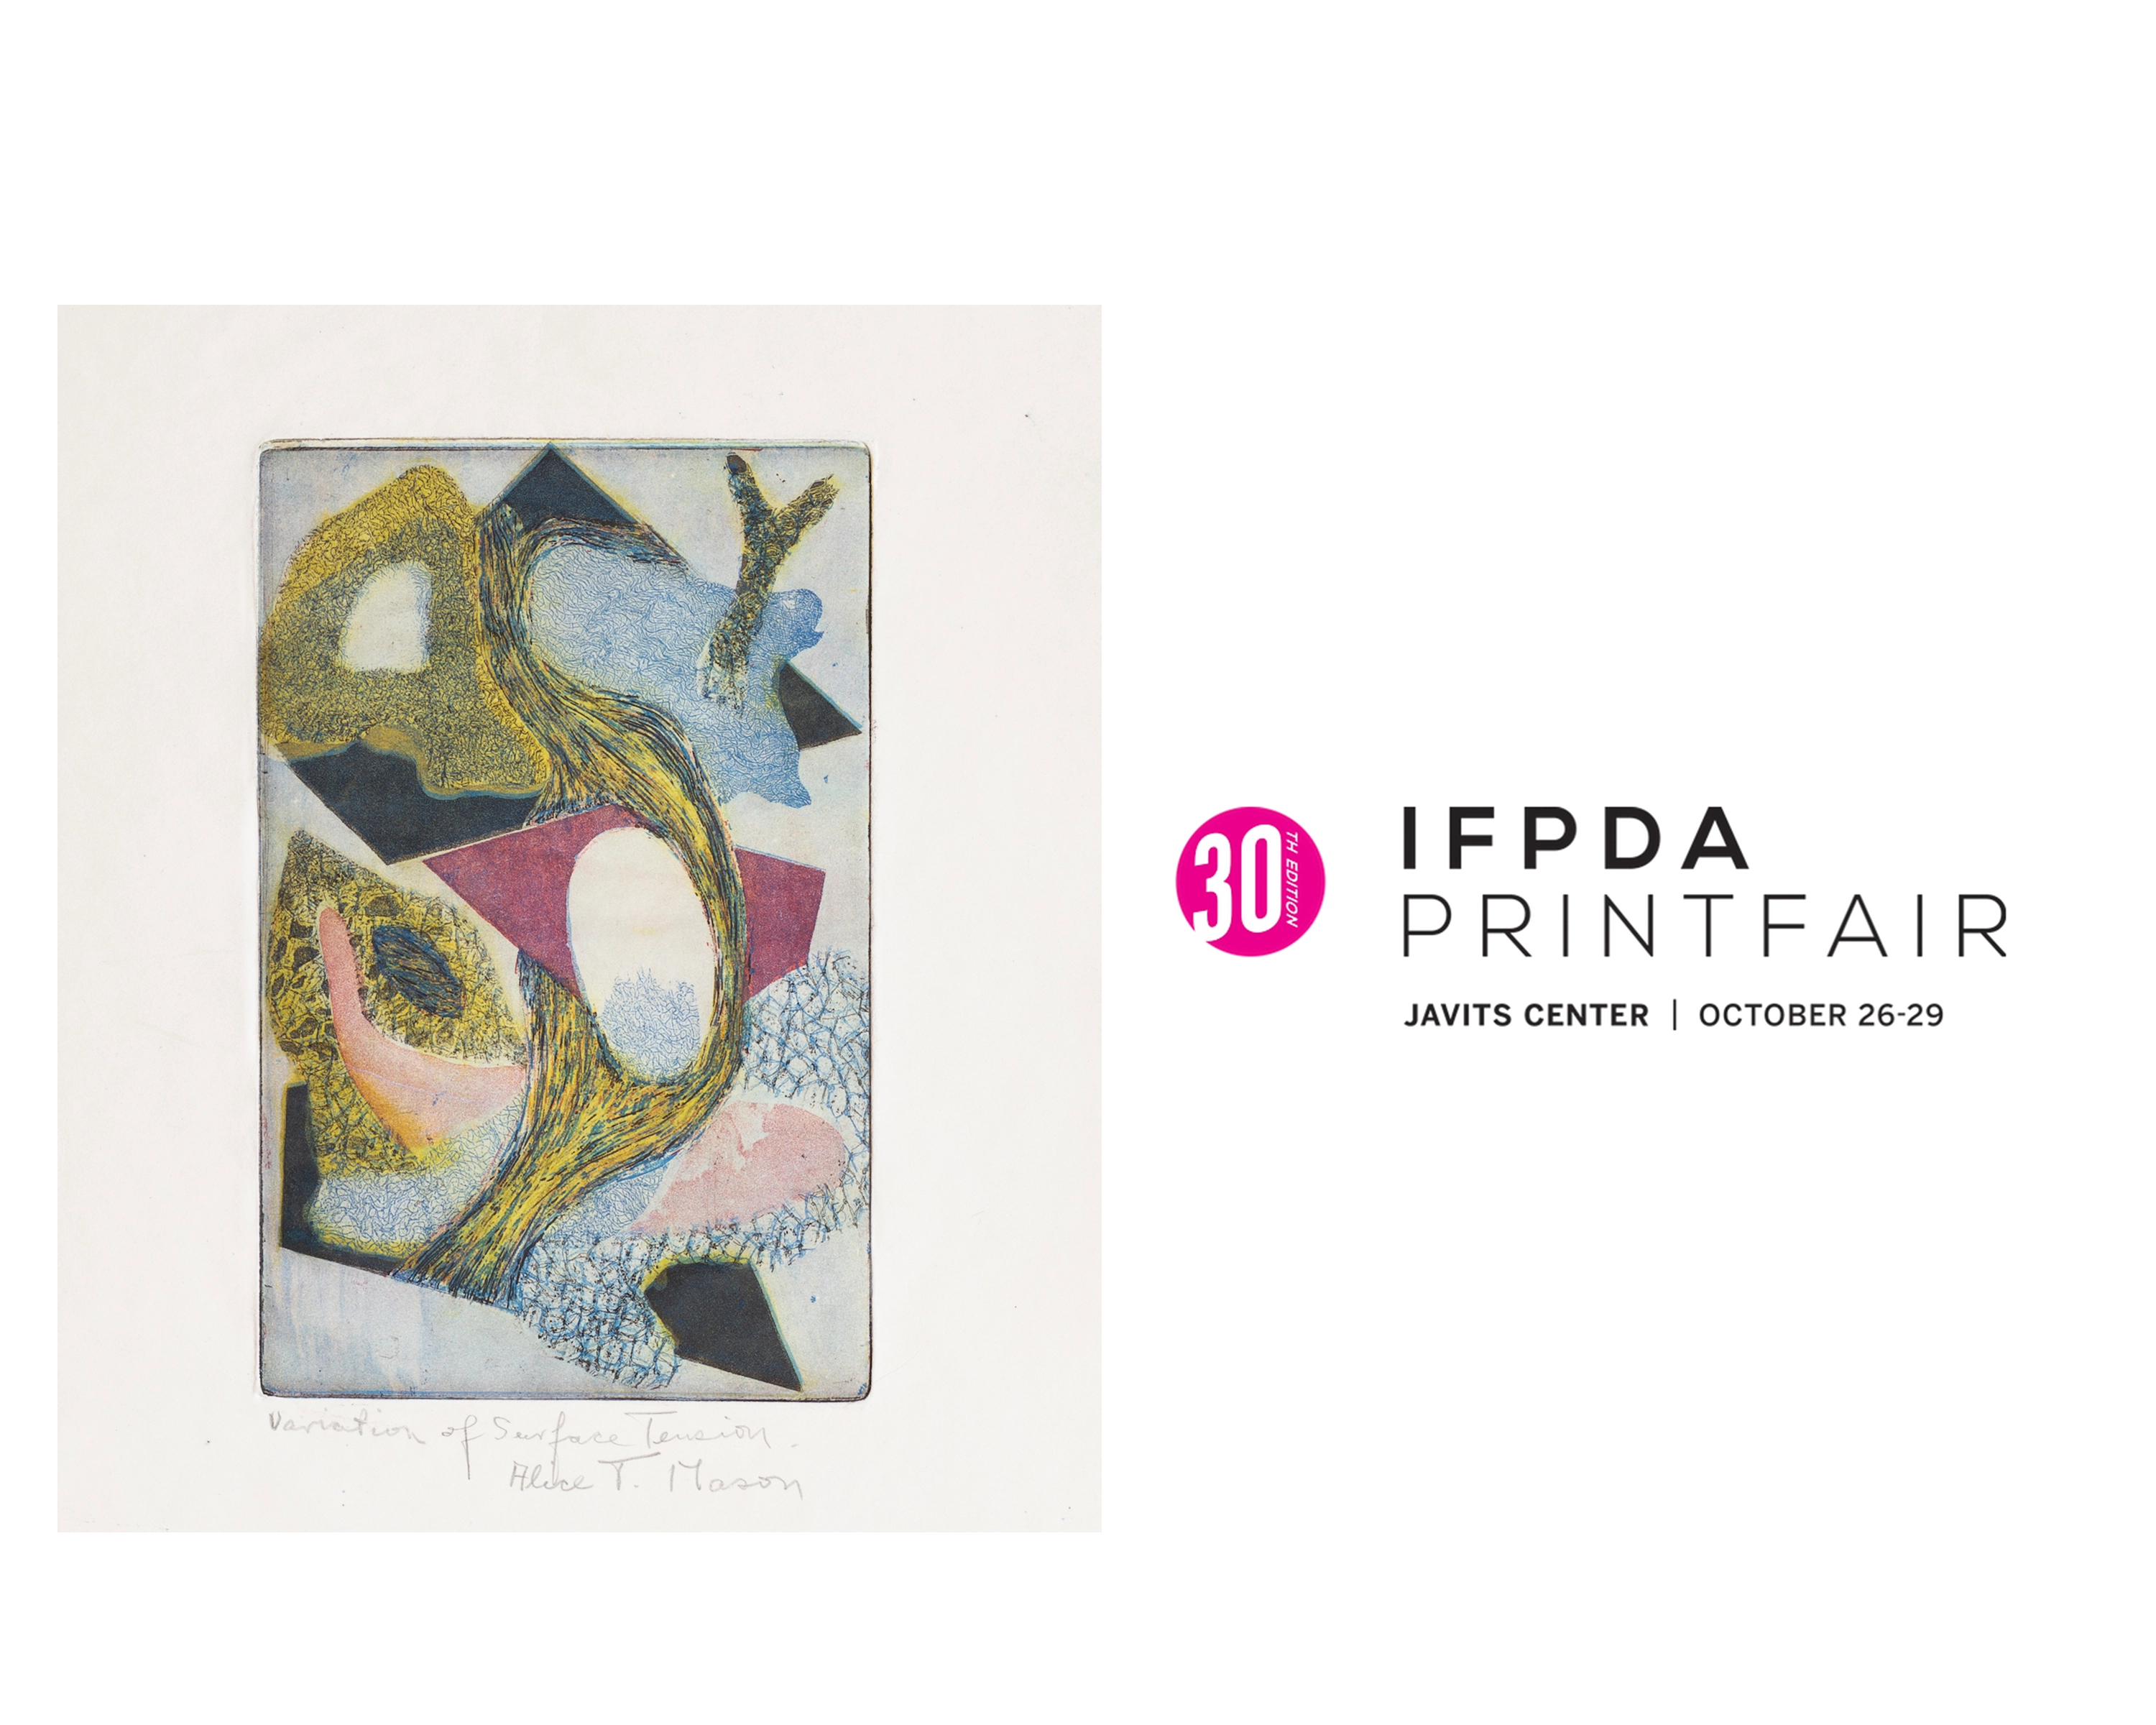 A white background containing an abstract, colorful etching on the left, and the text "IFPDA Print Fair " on the right